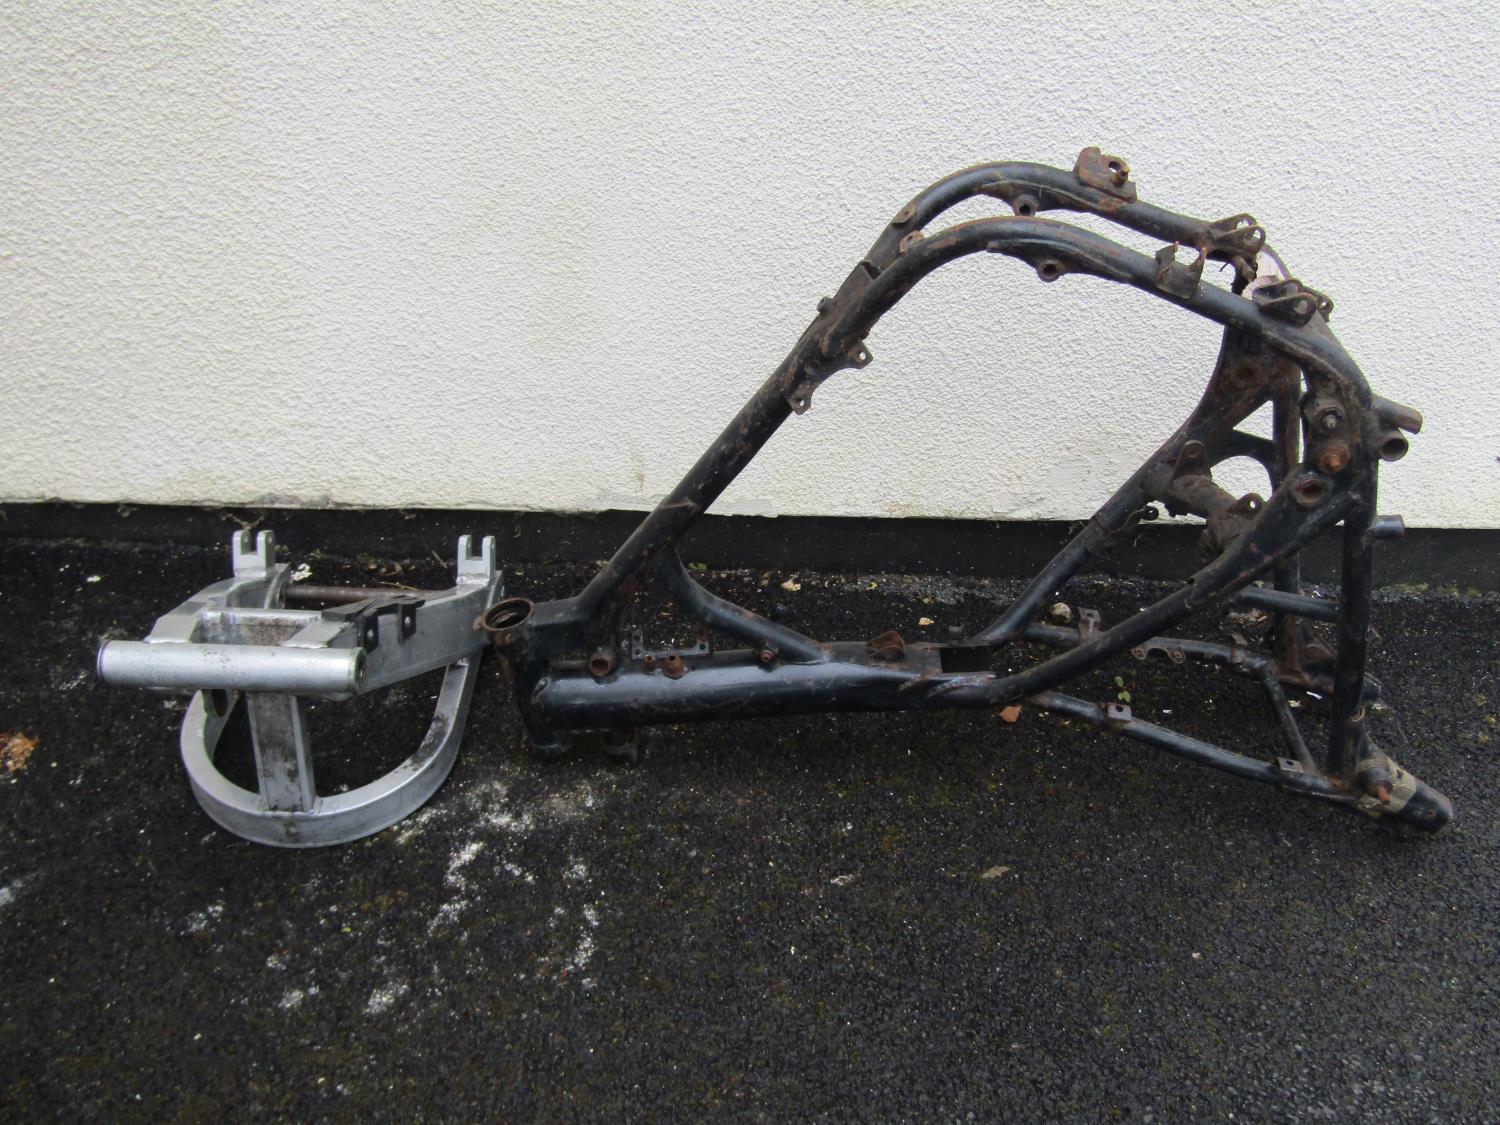 Motorcycle frame (unknown manufacture) together with a rear sub frame